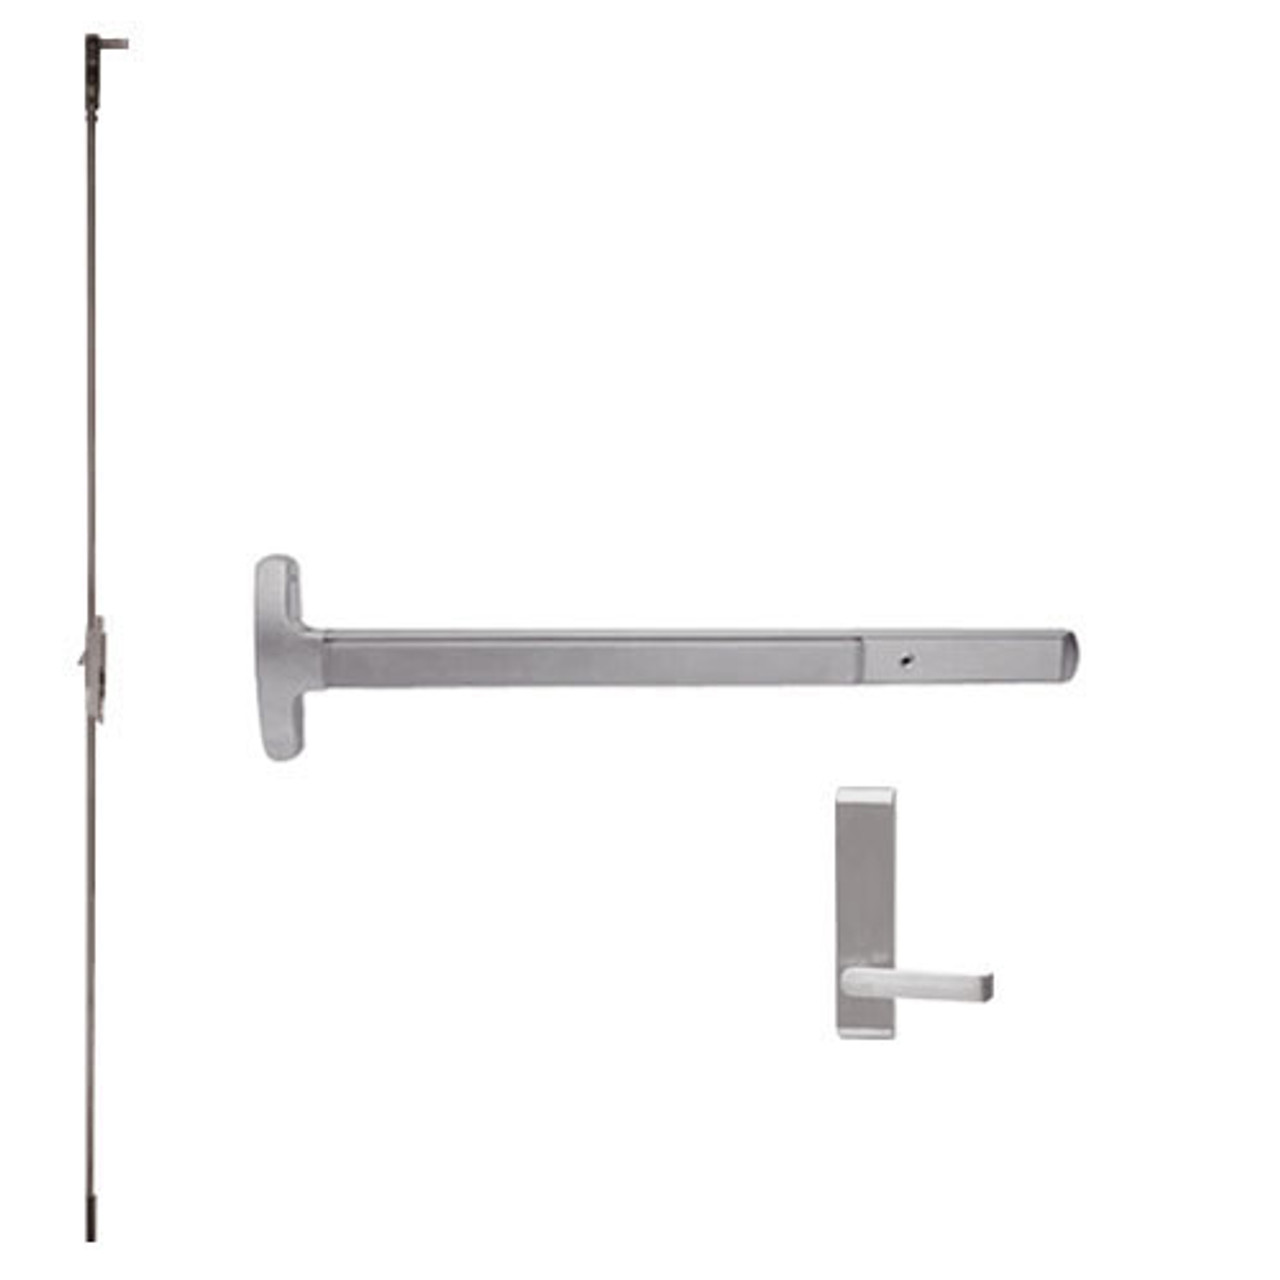 24-C-L-BE-DANE-US32D-2-LHR Falcon Exit Device in Satin Stainless Steel